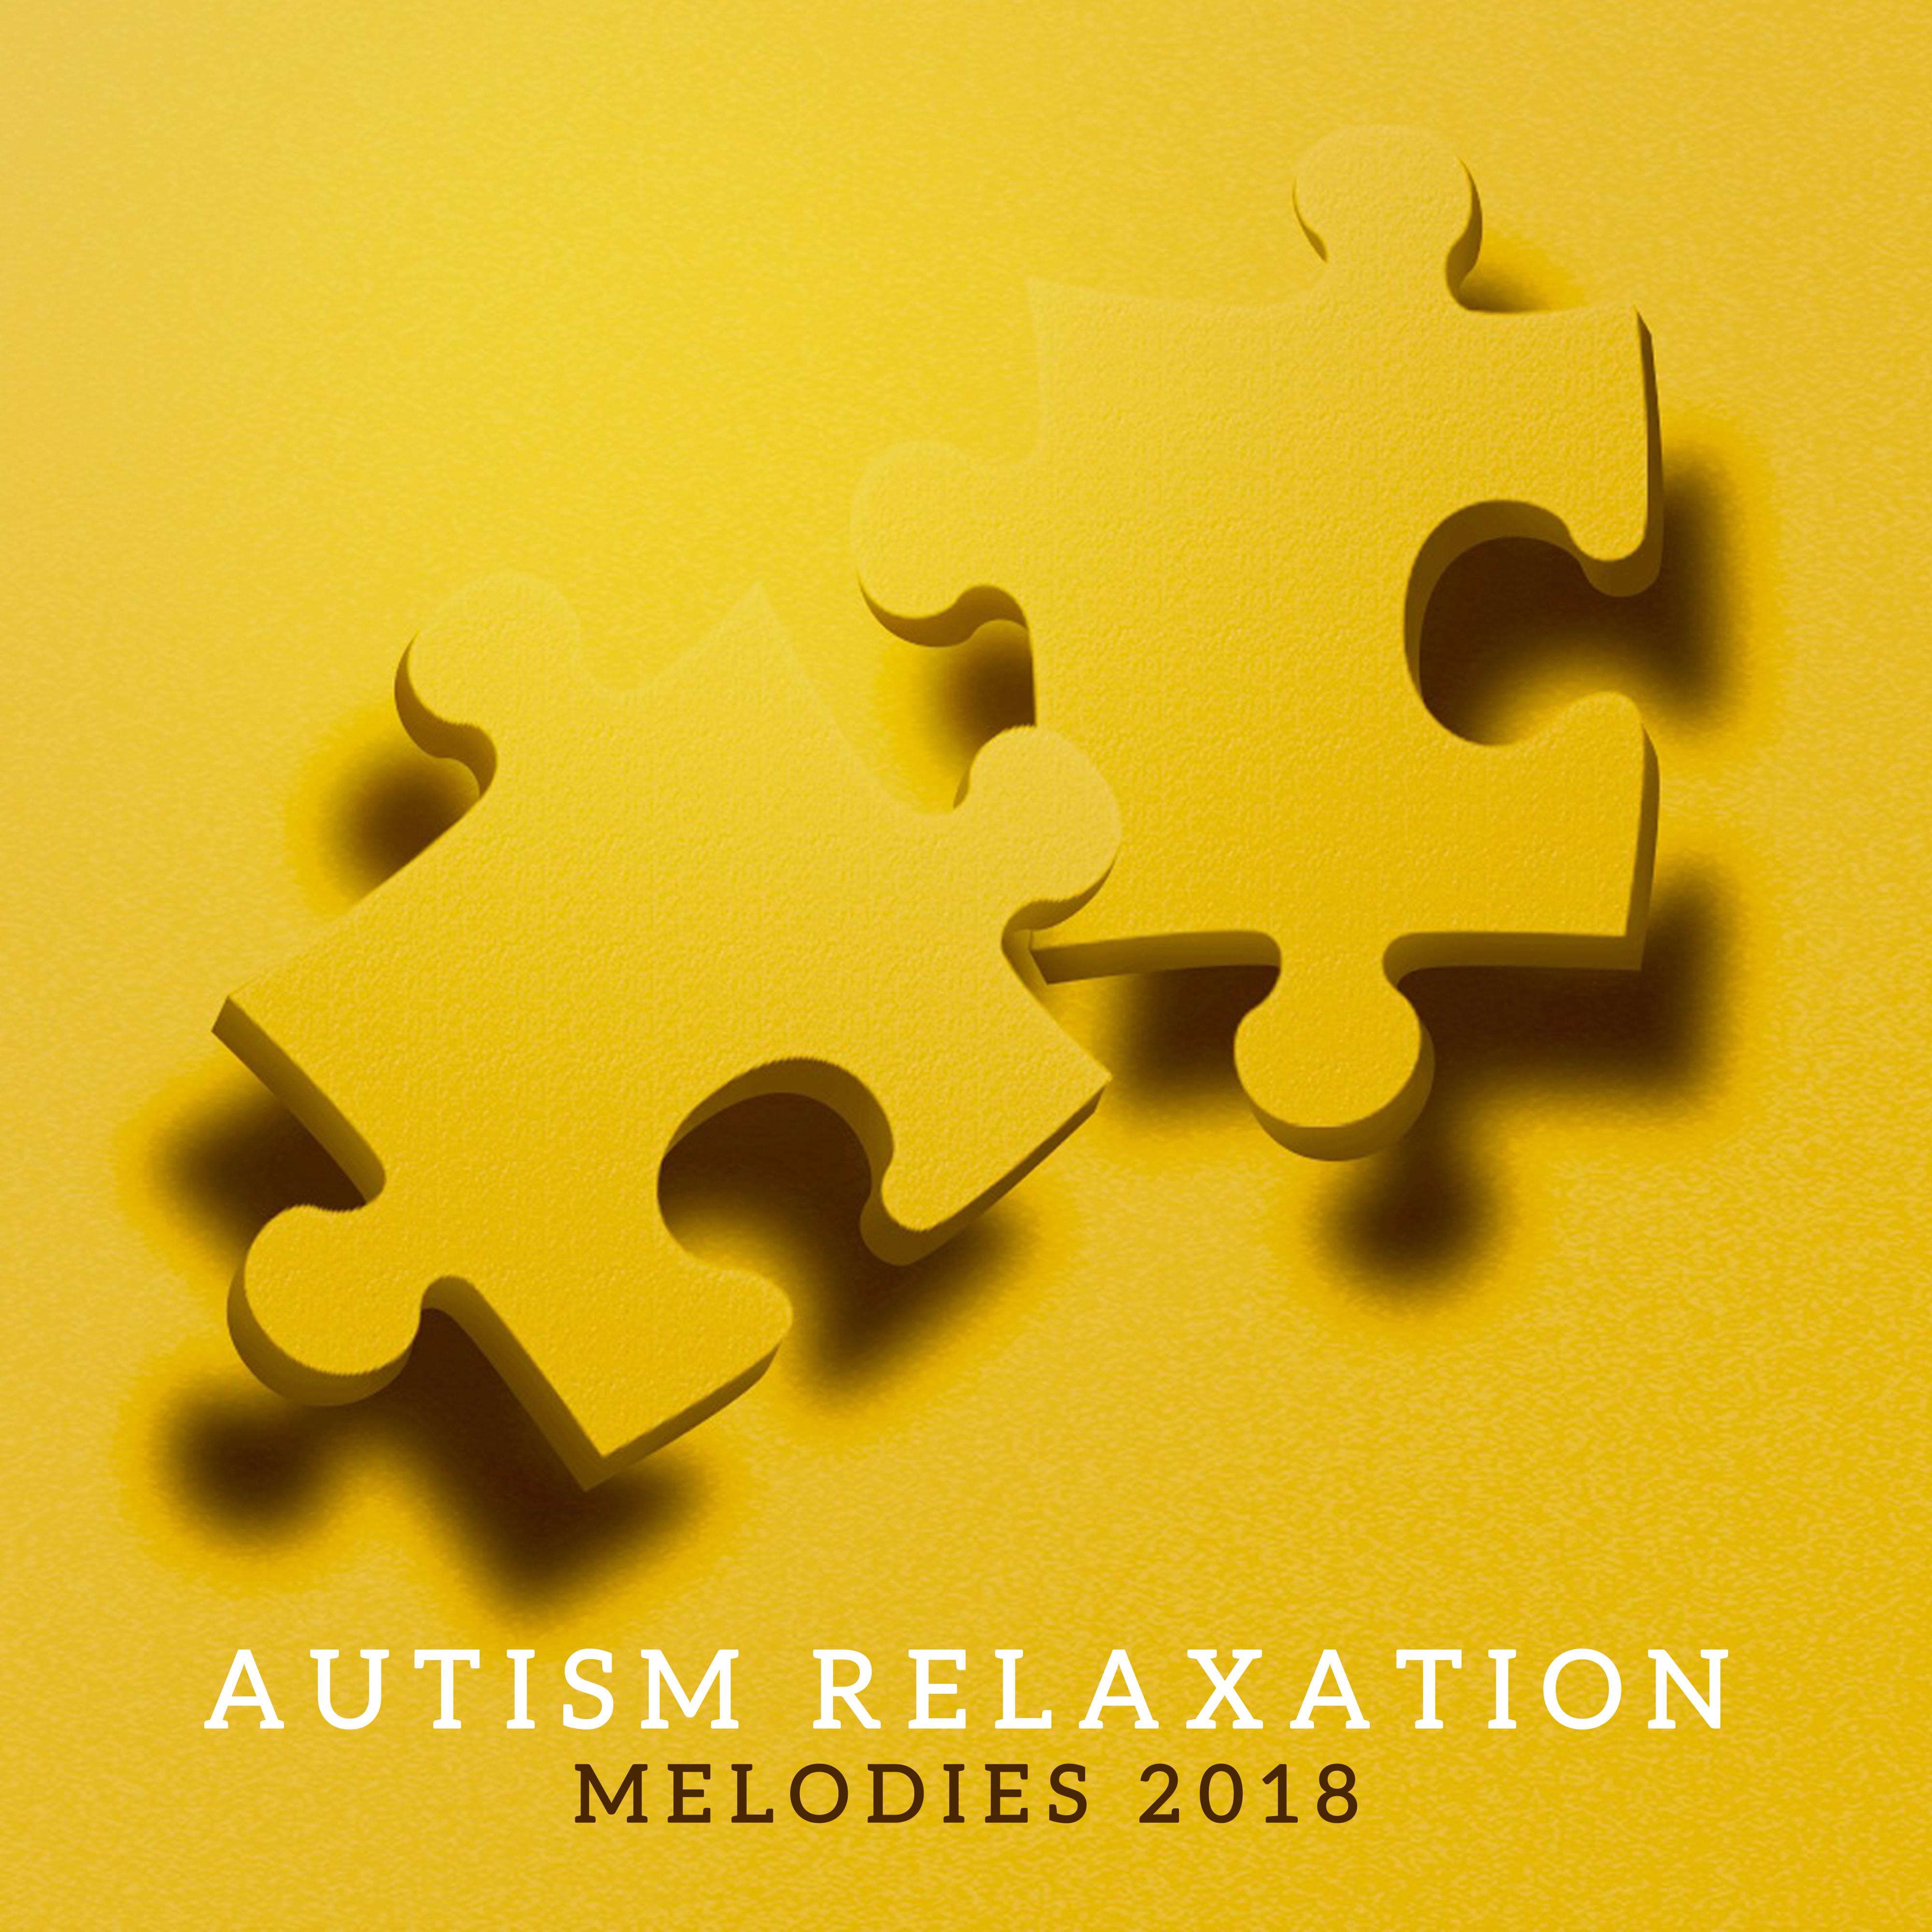 Autism Relaxation Melodies 2018